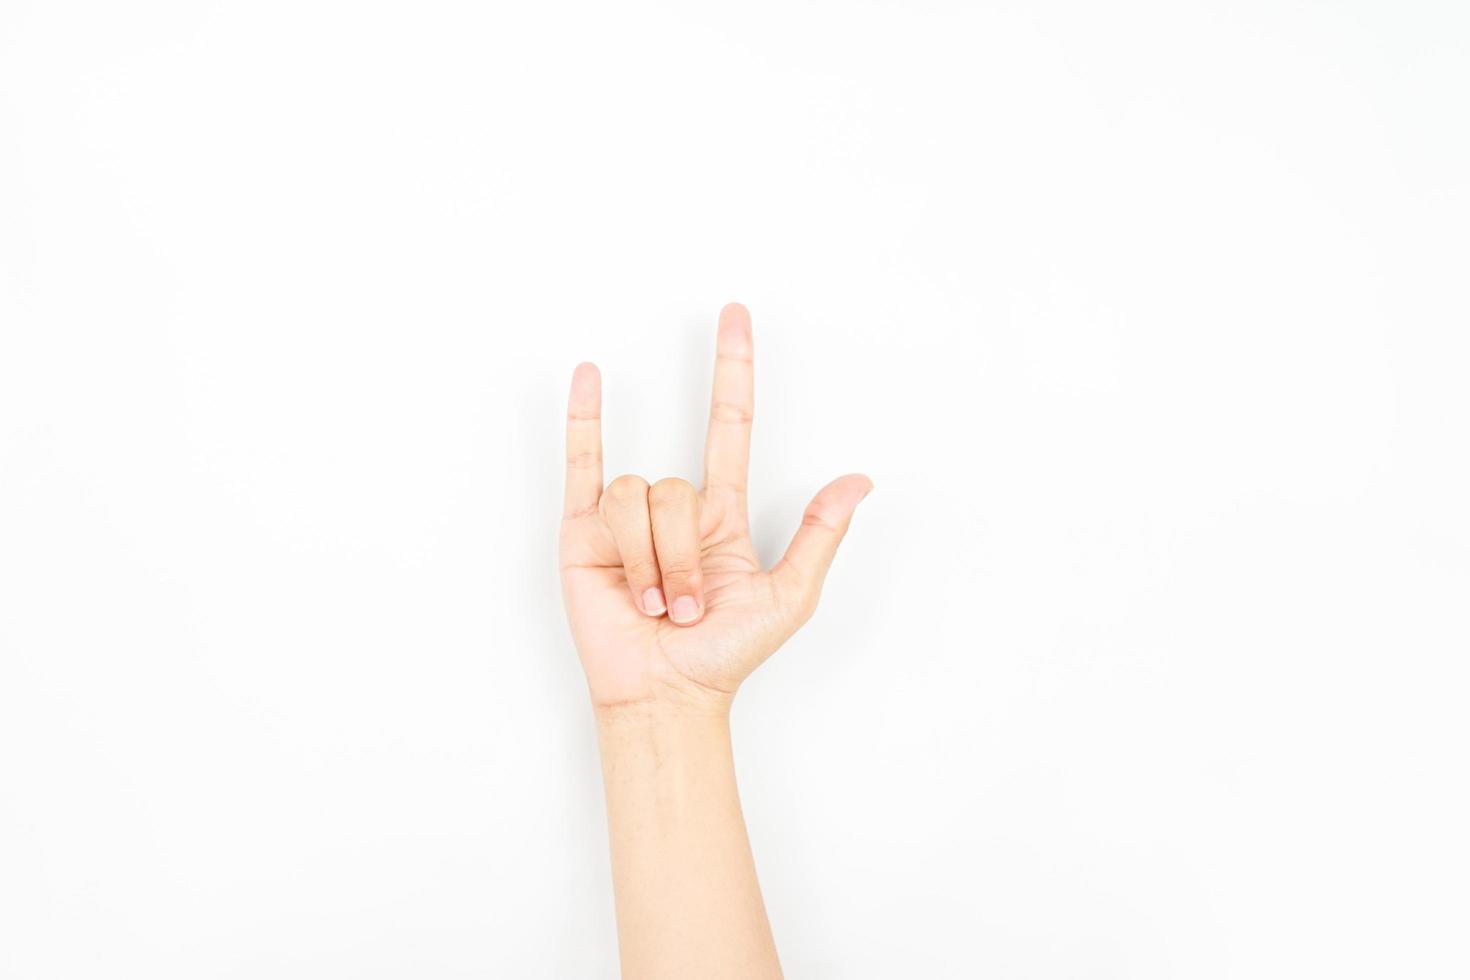 a hand gesture that is usually used to symbolize rock genre or metal. collection of the sign language using hand gestures. photo